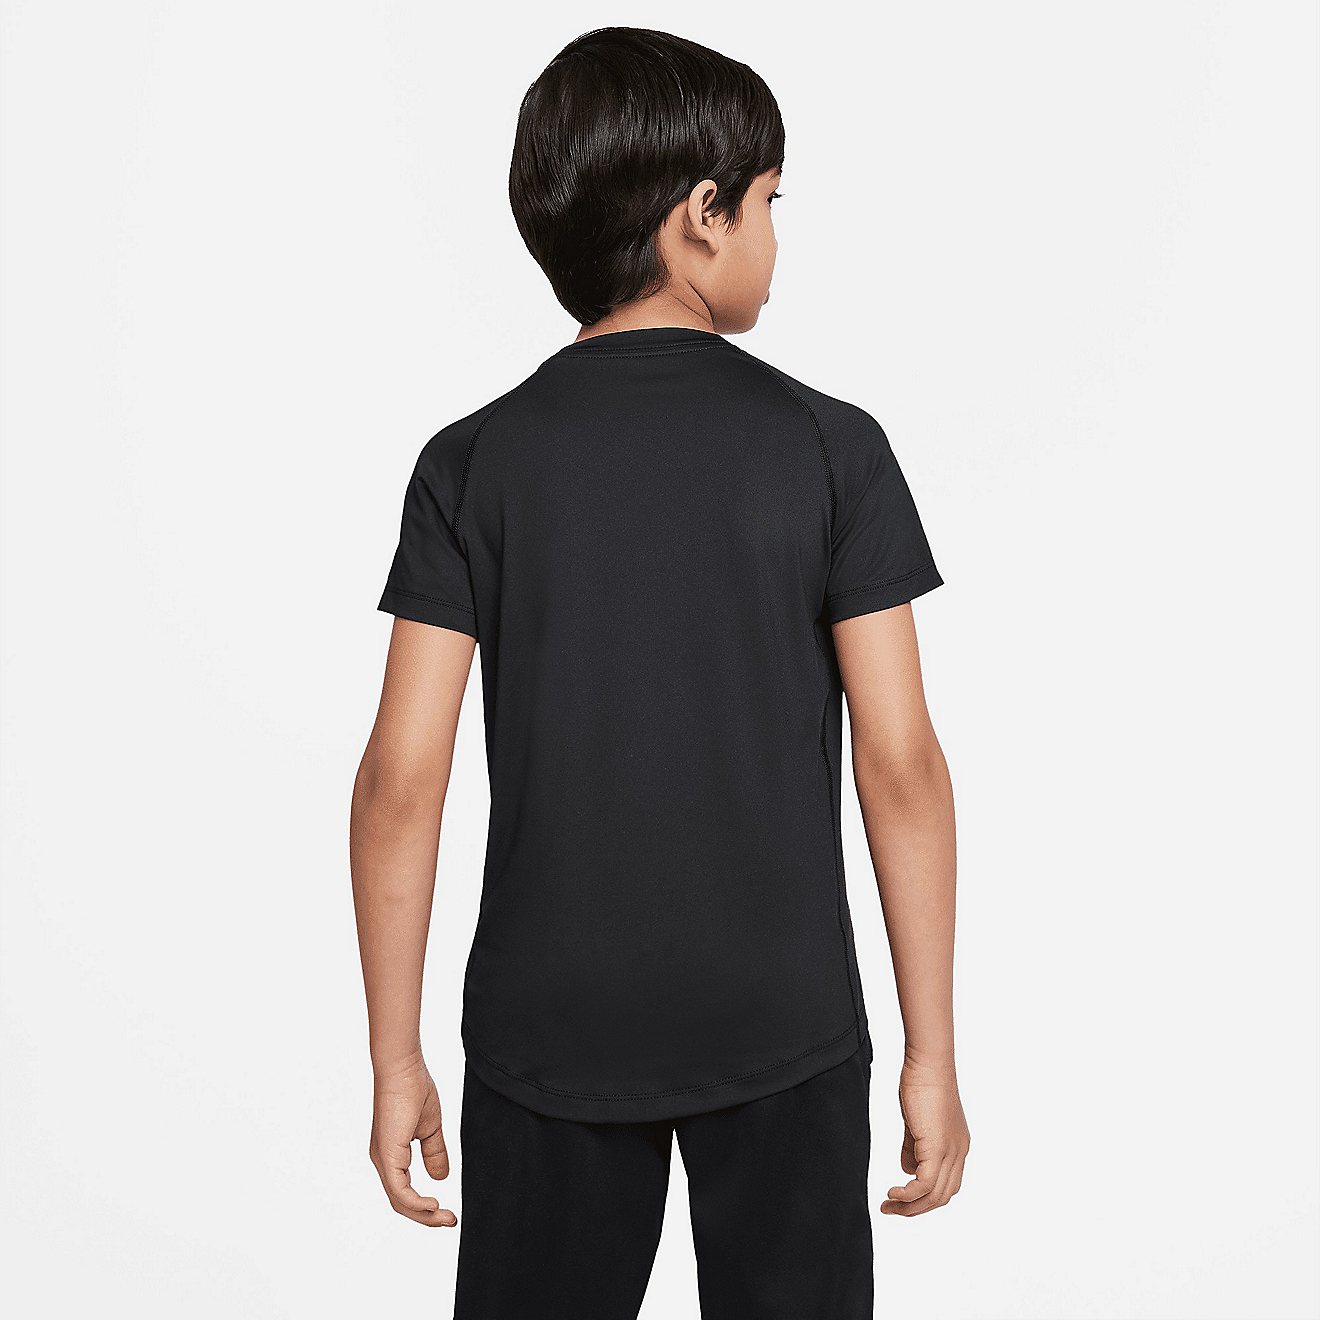 Nike Boys' Pro Fitted Short Sleeve Shirt                                                                                         - view number 2